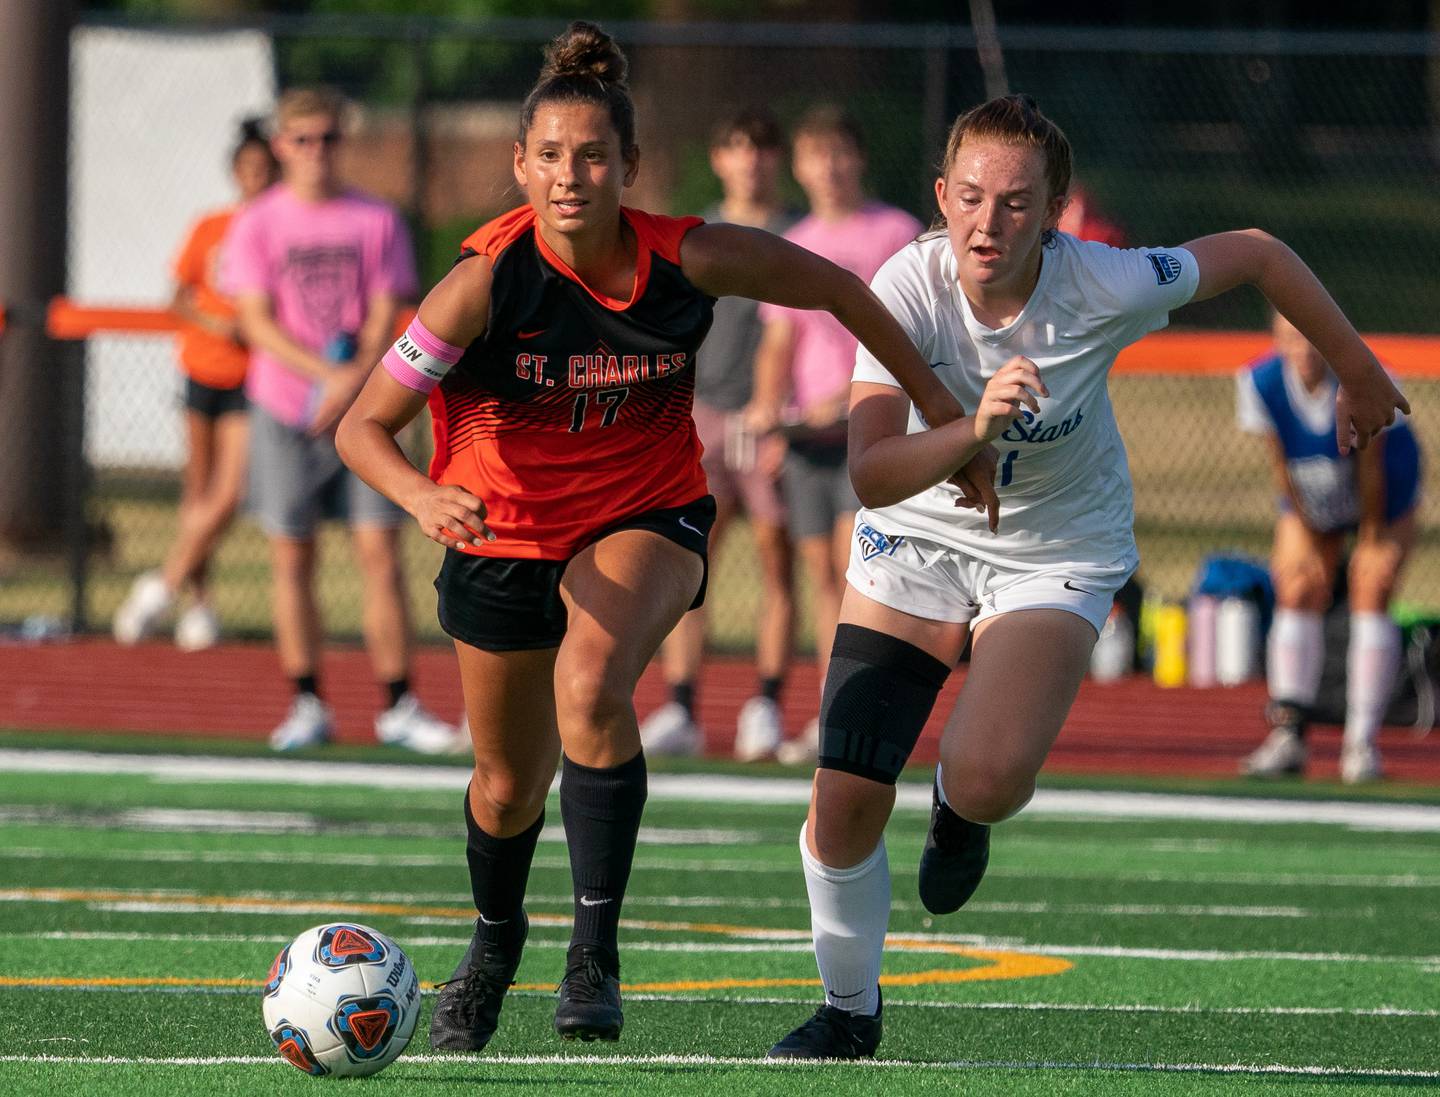 St.Charles East's Hannah Miller (17) moves the ball up the field against St.Charles North's Abigail Vichich (21) during a Class 3A girls soccer sectional final in St.Charles on Friday, June 11, 2021.